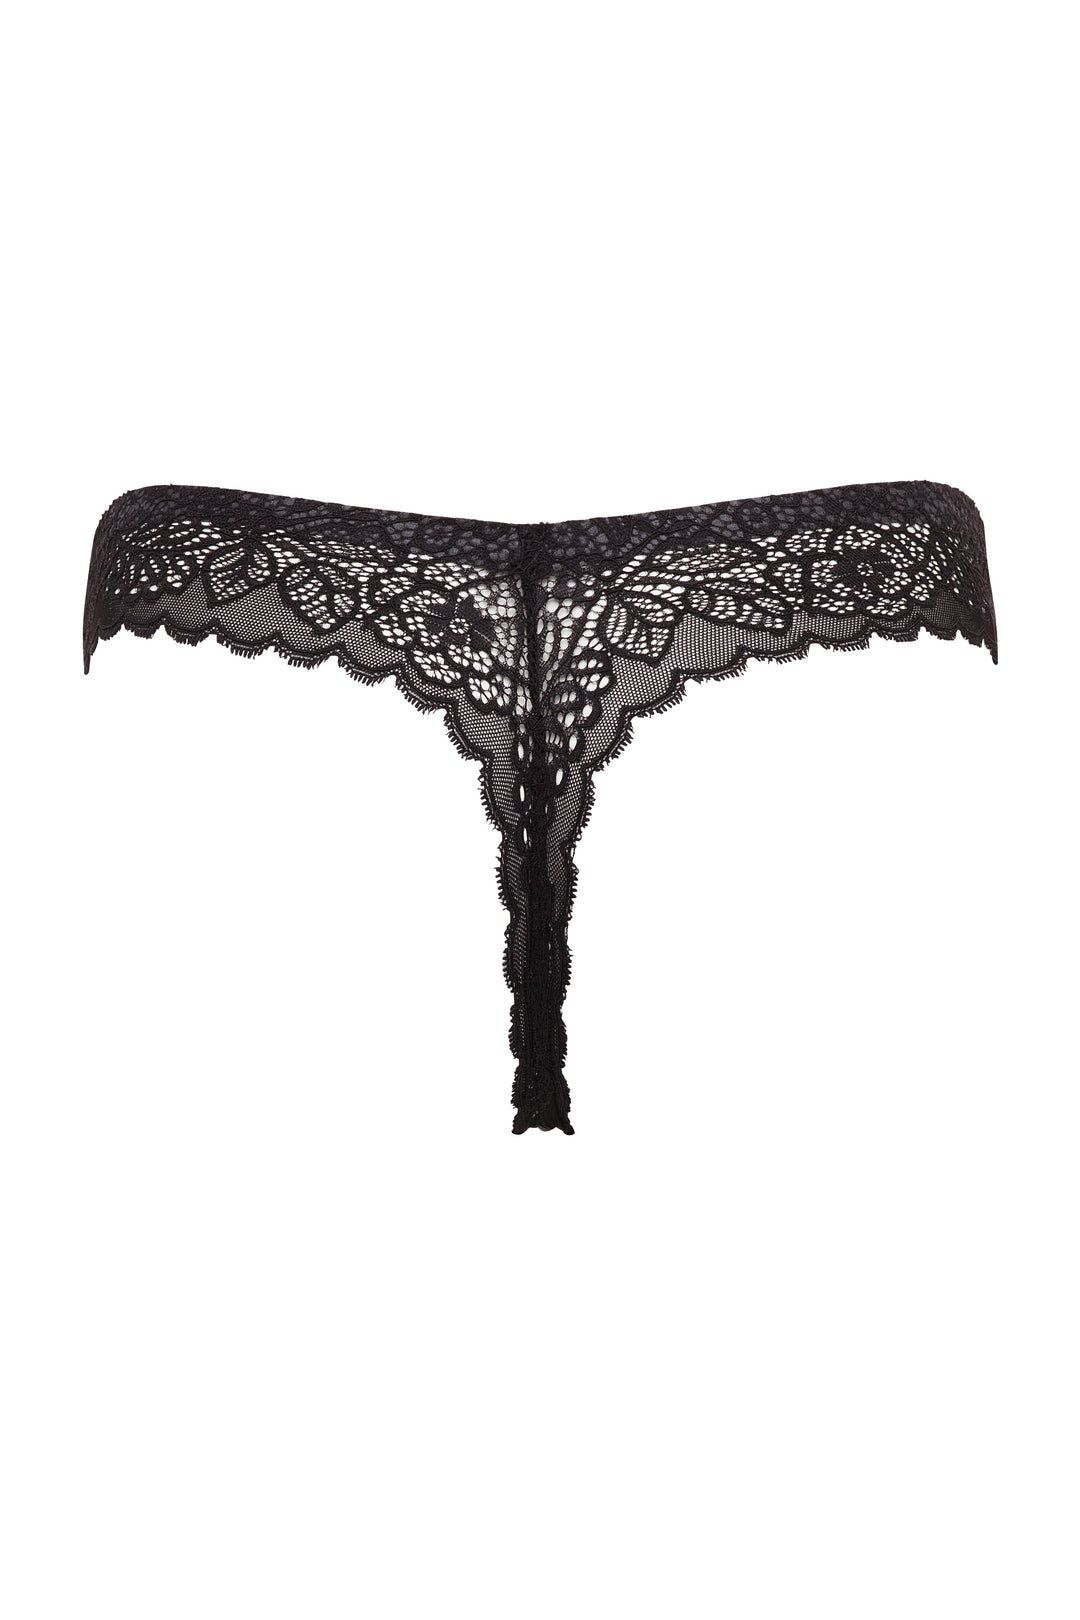 René Rofé Sophie B By Rene Rofe Lingerie 5 Pack Laser Cut No Show Invisible Thong Panties